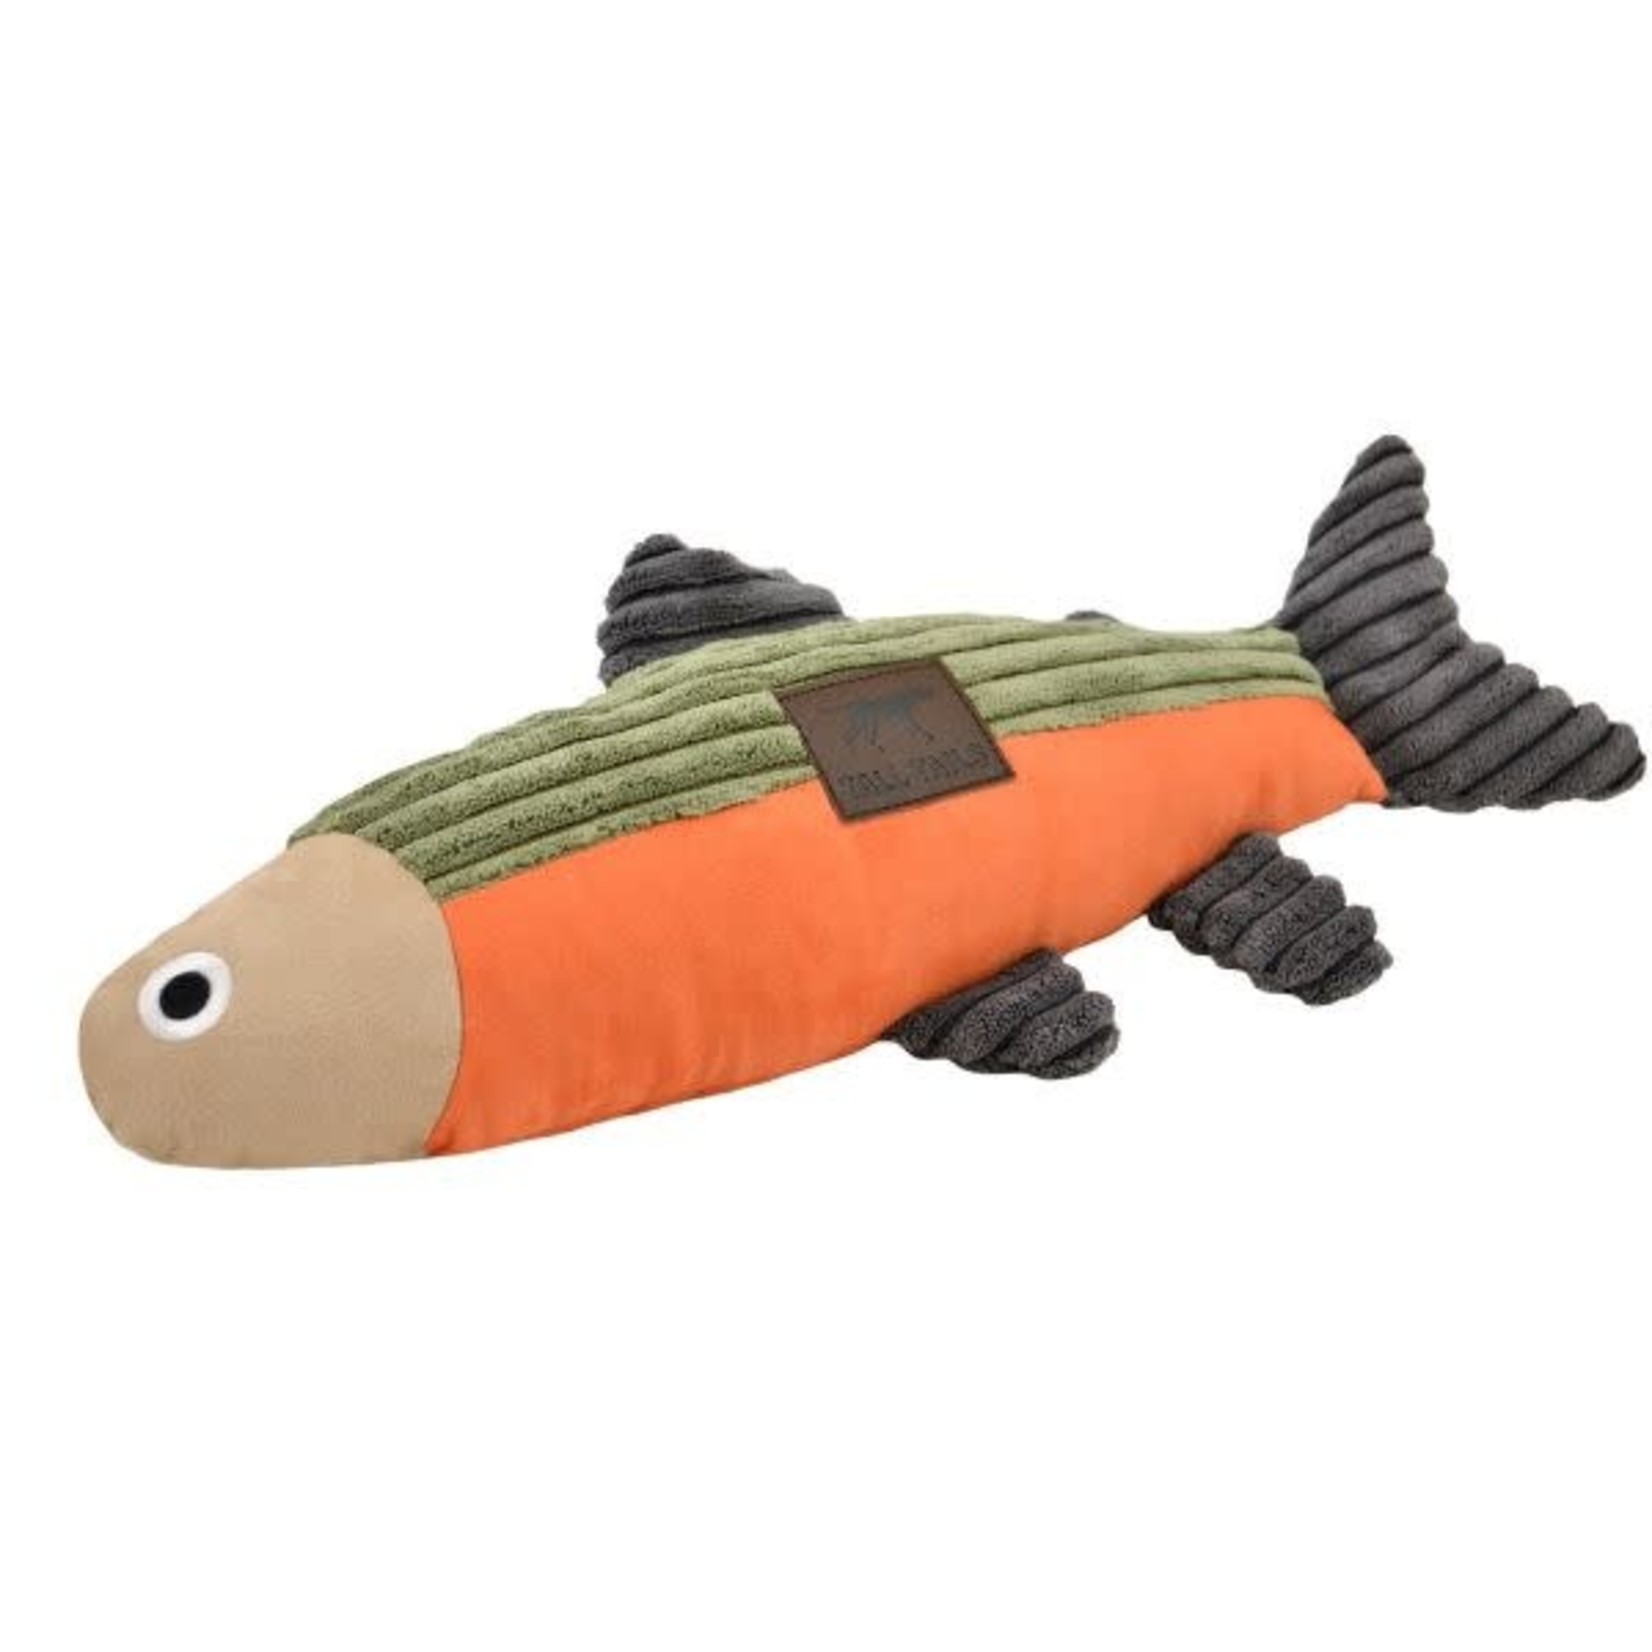 Tall Tails TALL TAILS Squeaker Fish 12" Dog Toy